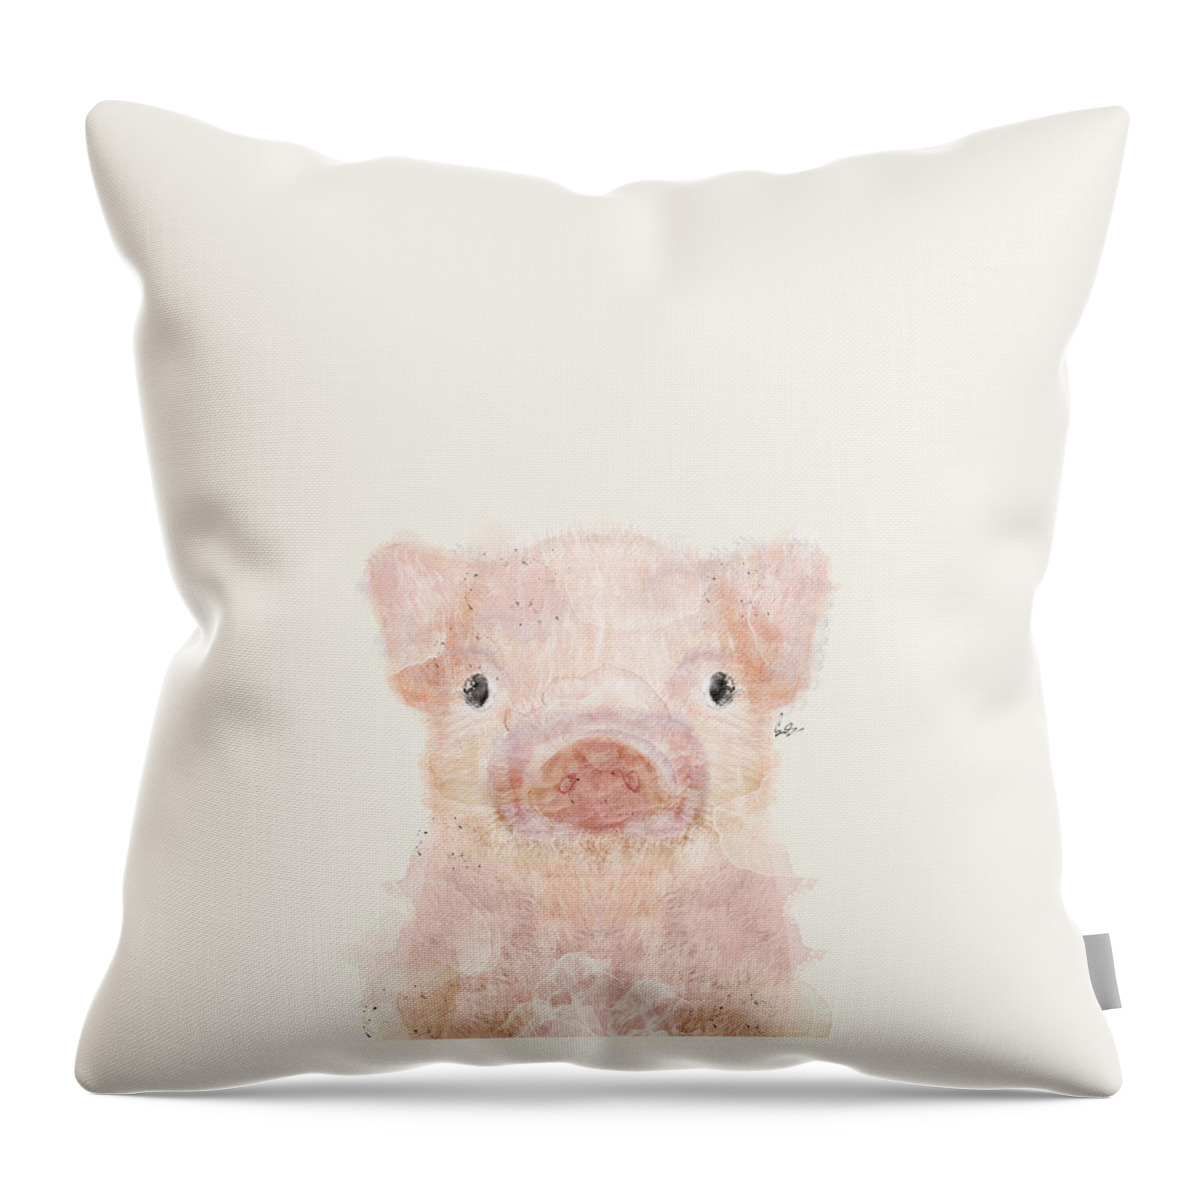 Pig Throw Pillow featuring the painting Little Pig by Bri Buckley